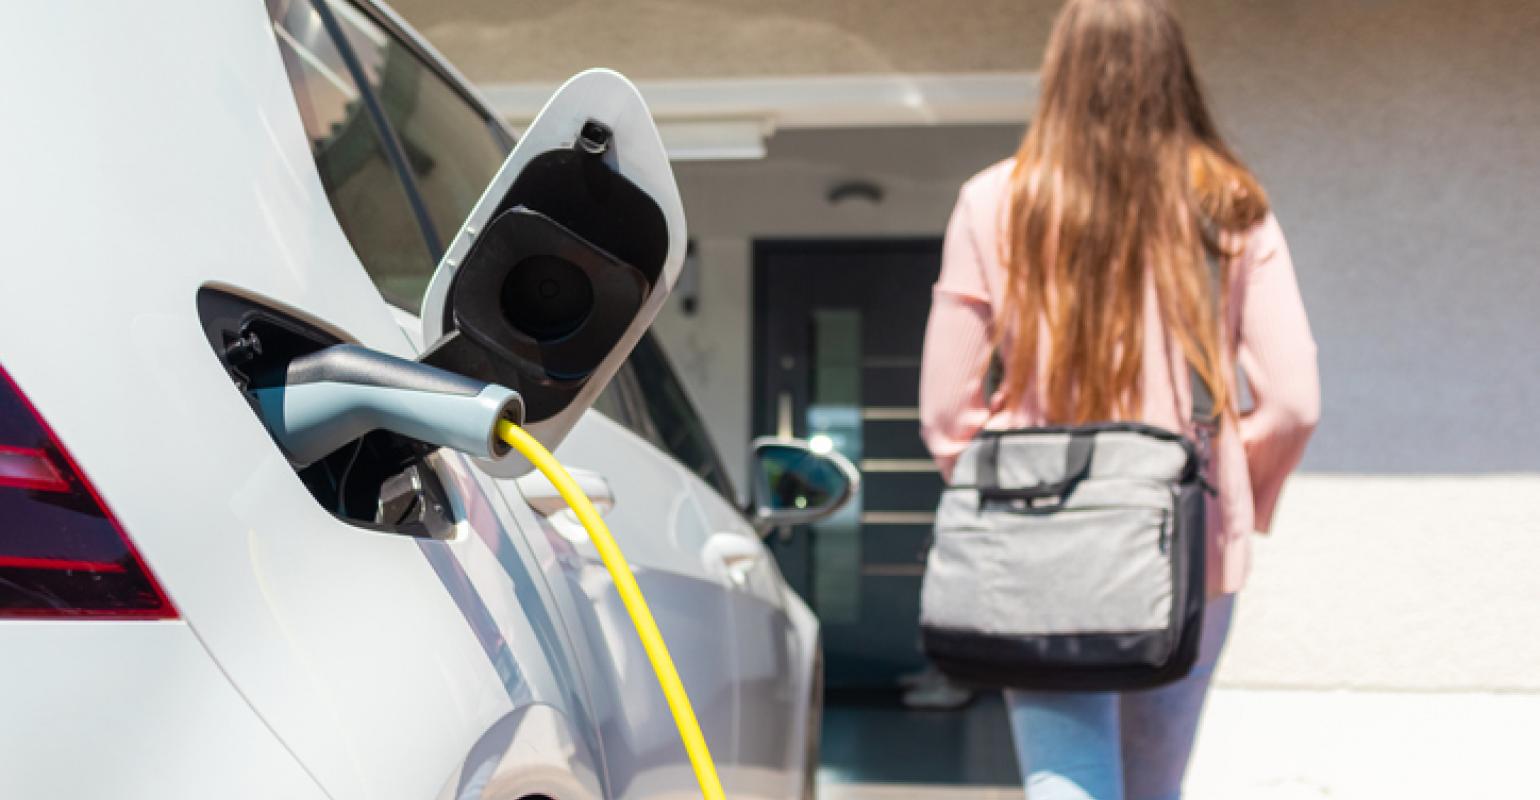 Why Do Young People Want an EV? Because They’re ‘Cool’ | WardsAuto